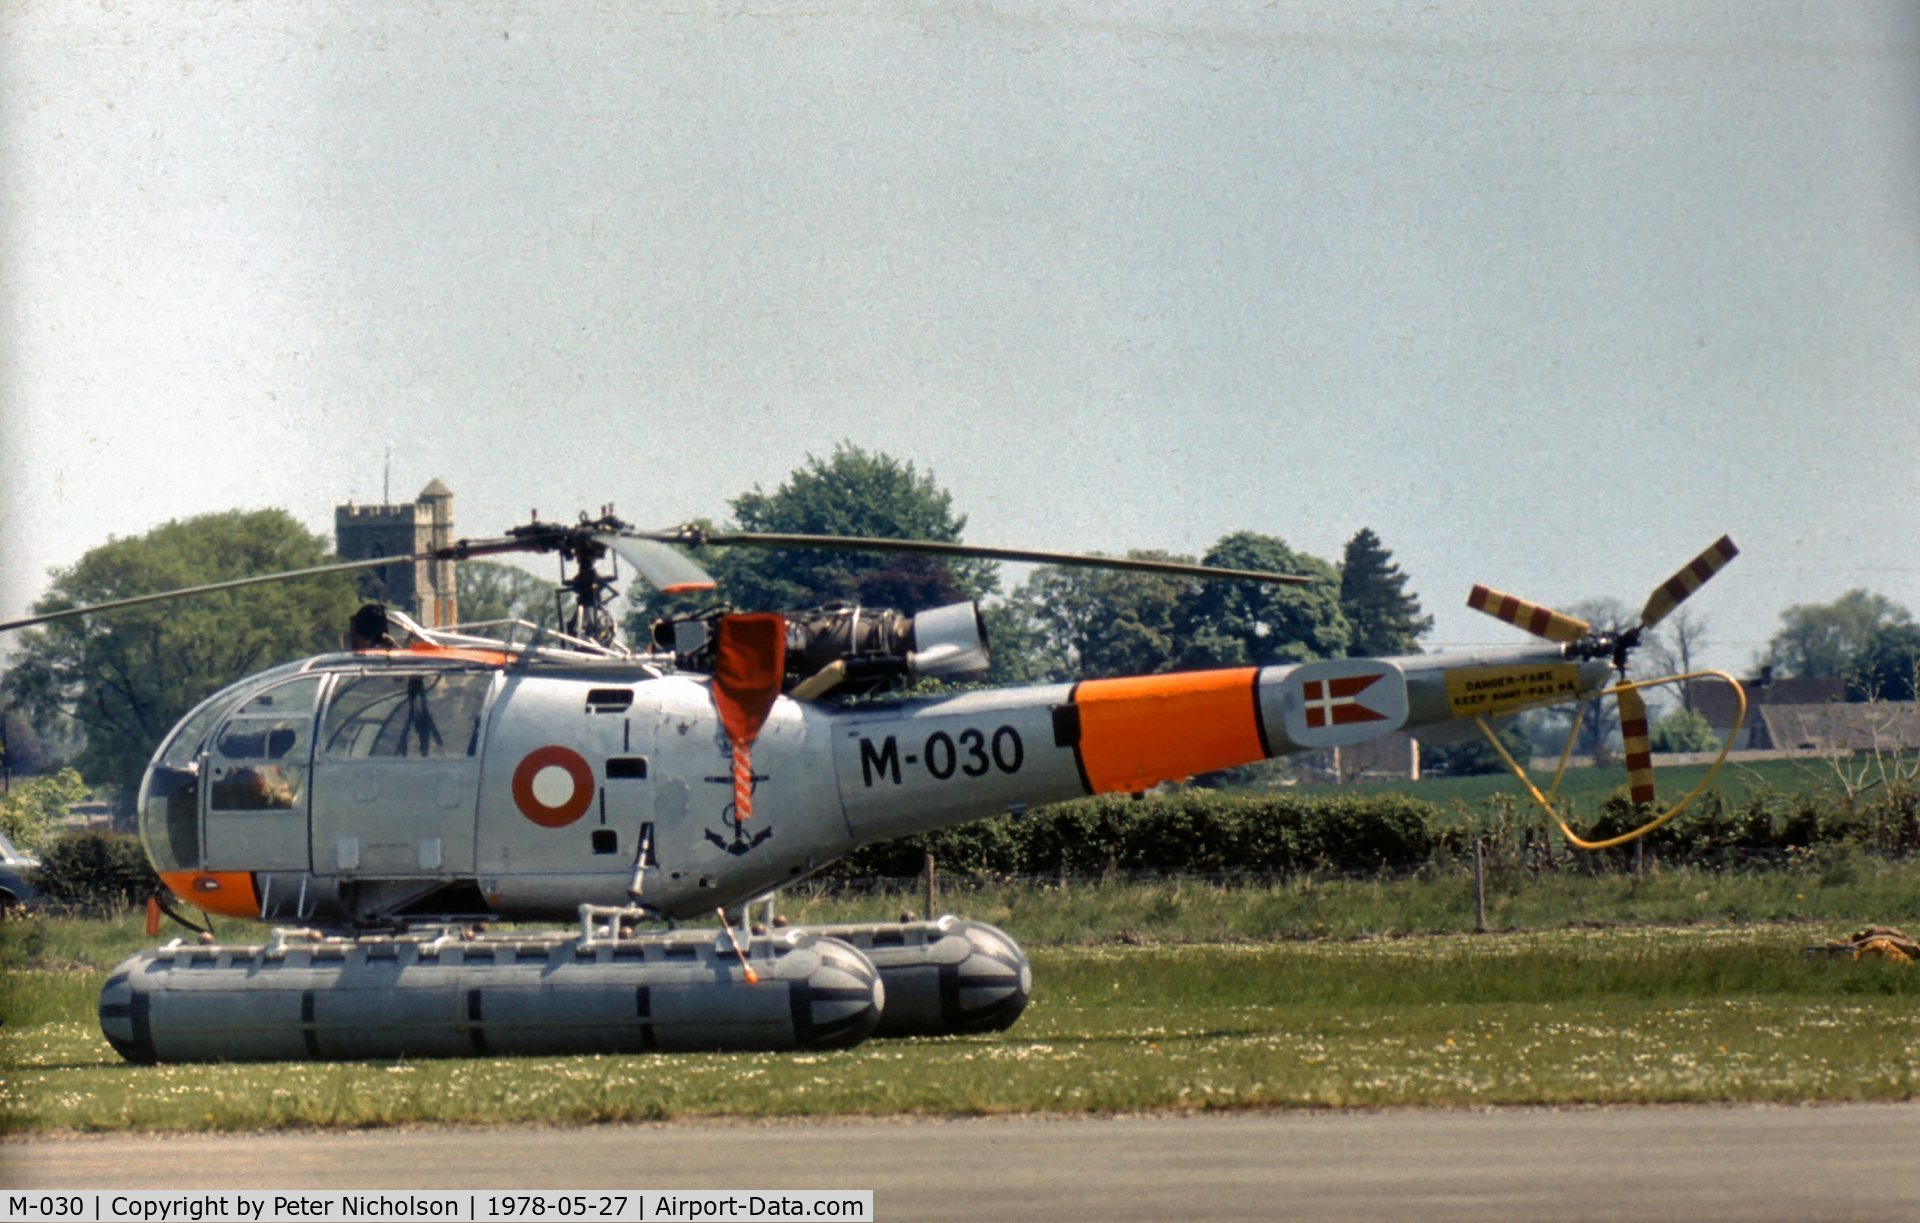 M-030, 1962 Sud SE-3160 Alouette III C/N 1030, Alouette III of Royal Danish Navy but maintained by Esk 722 Royal Danish Air Force at the 1978 Bassingbourn Air Show.